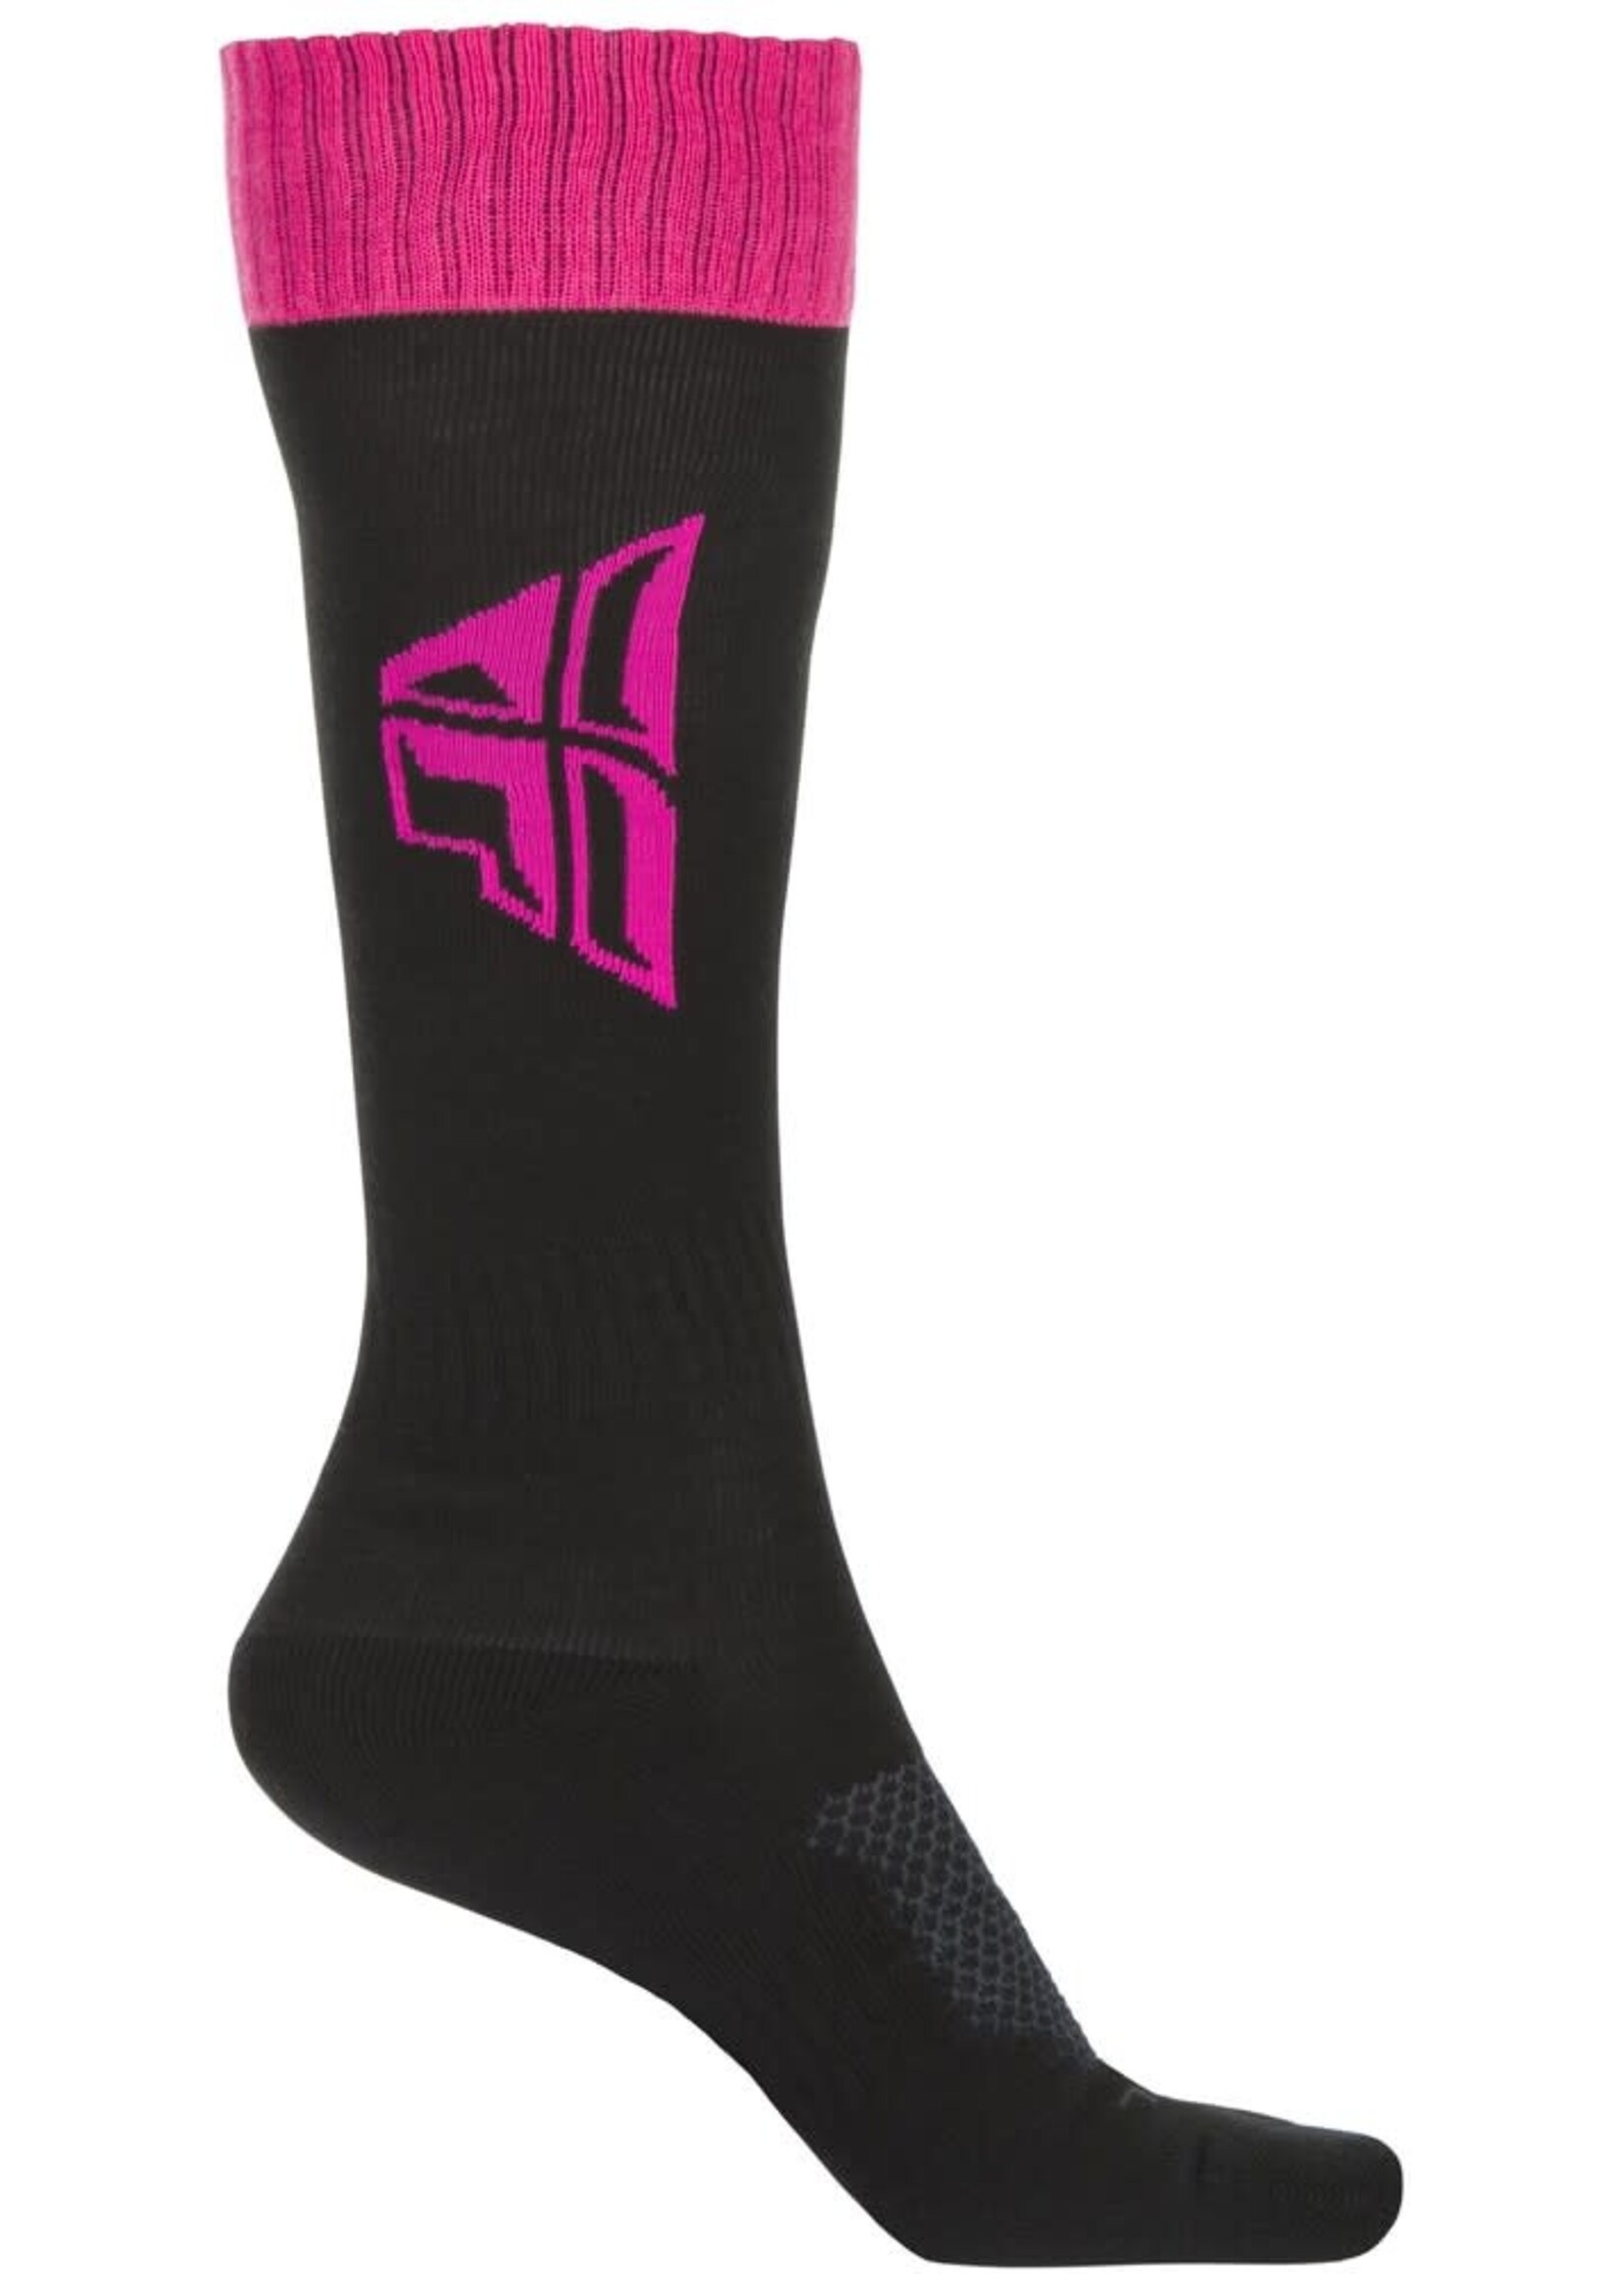 FLY RACING FLY RACING MX SOCK THICK BLACK/PINK/GREY SM/MD